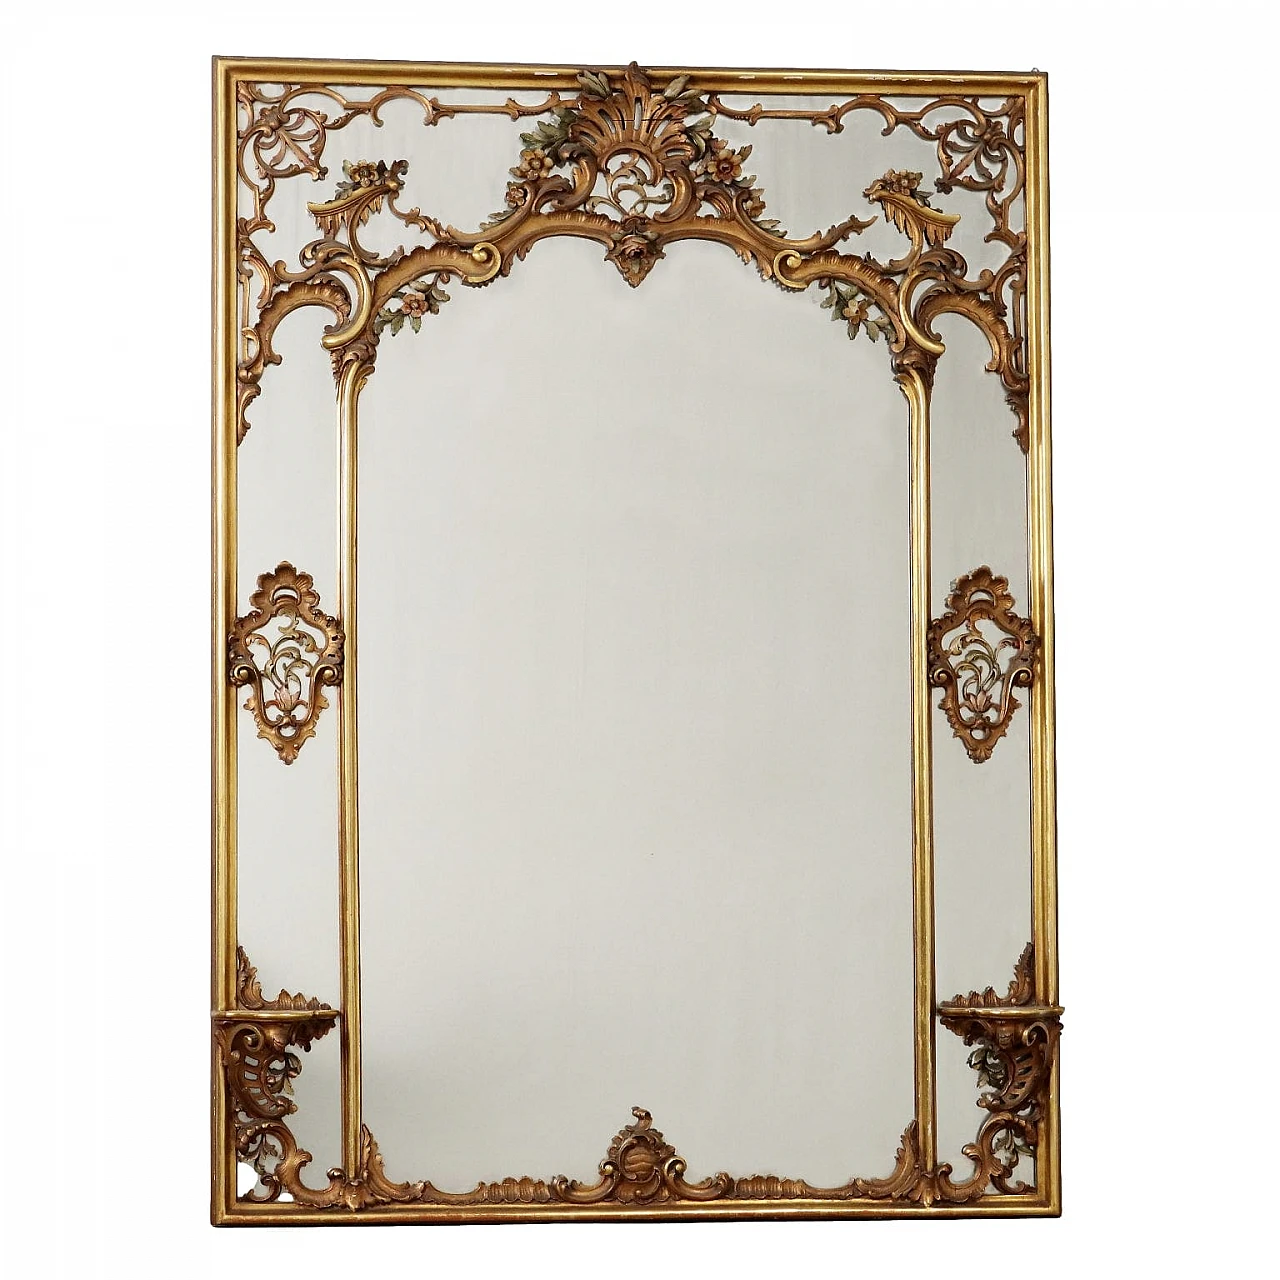 Gilded frame mirror carved with floral motifs 1